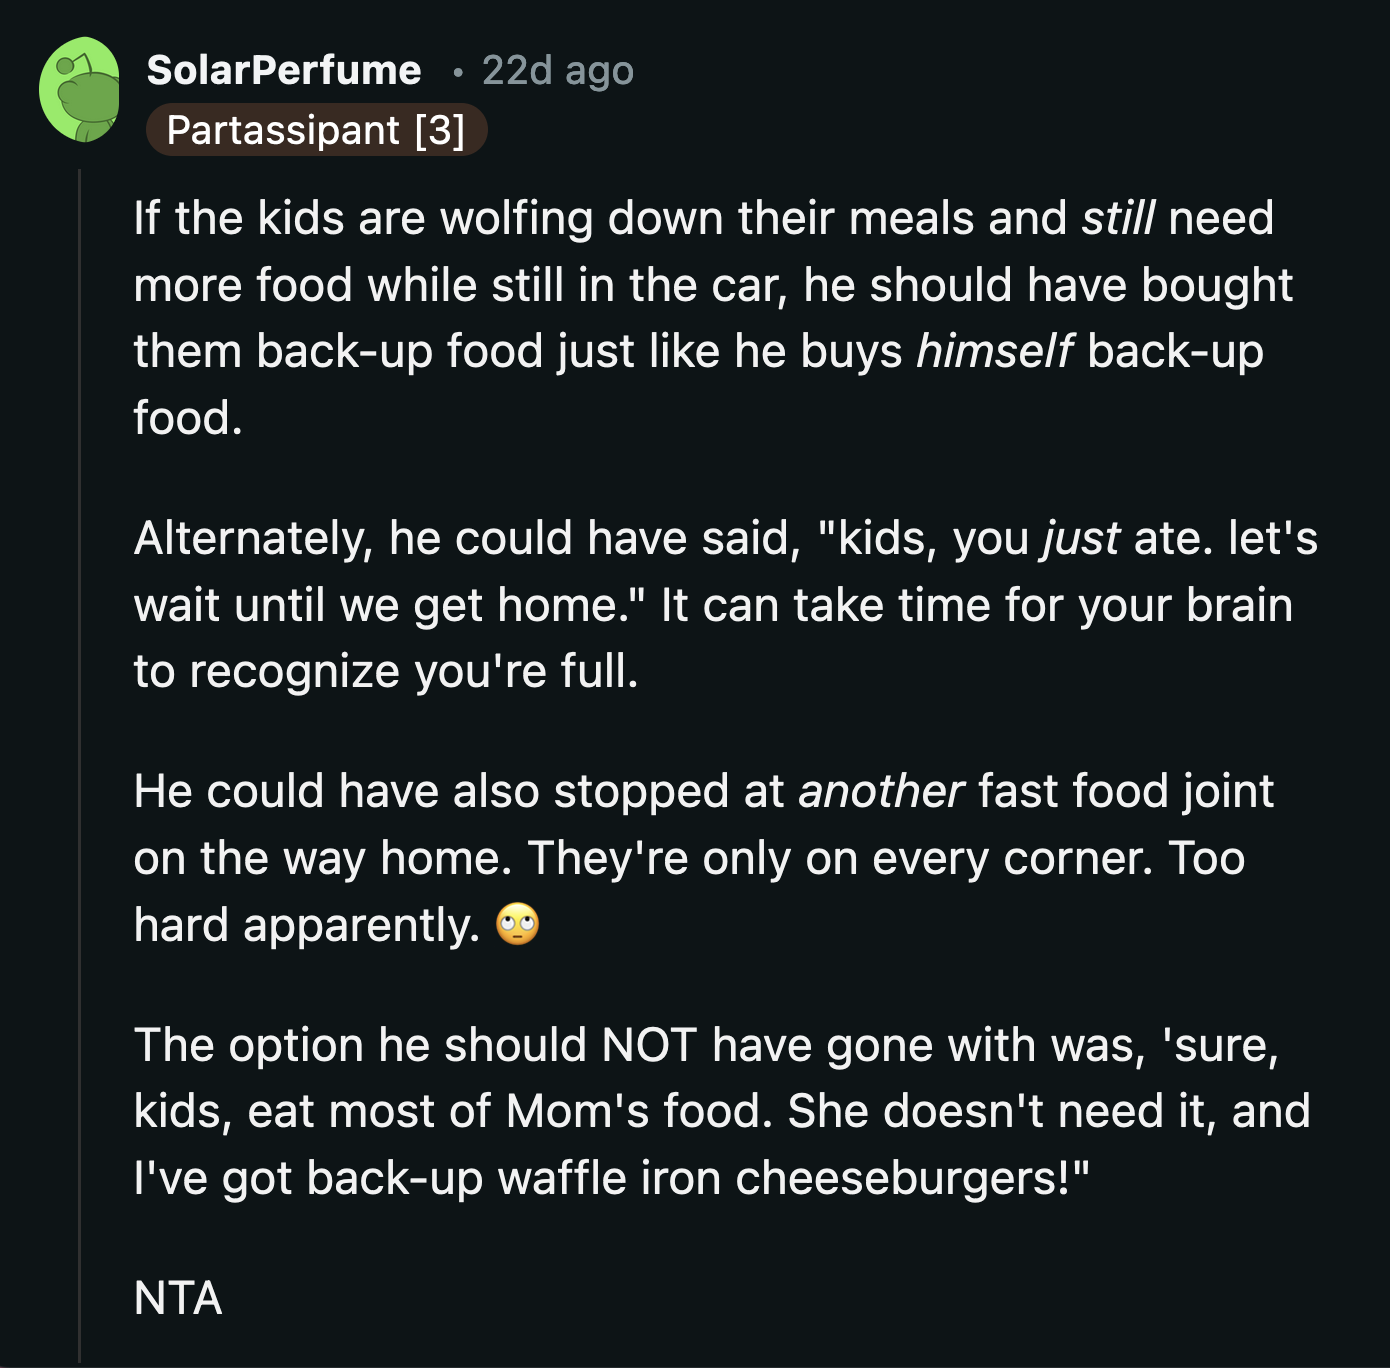 A majority of the comments shared OP's opinion. They said her husband had a lot of options instead of giving away OP's food.